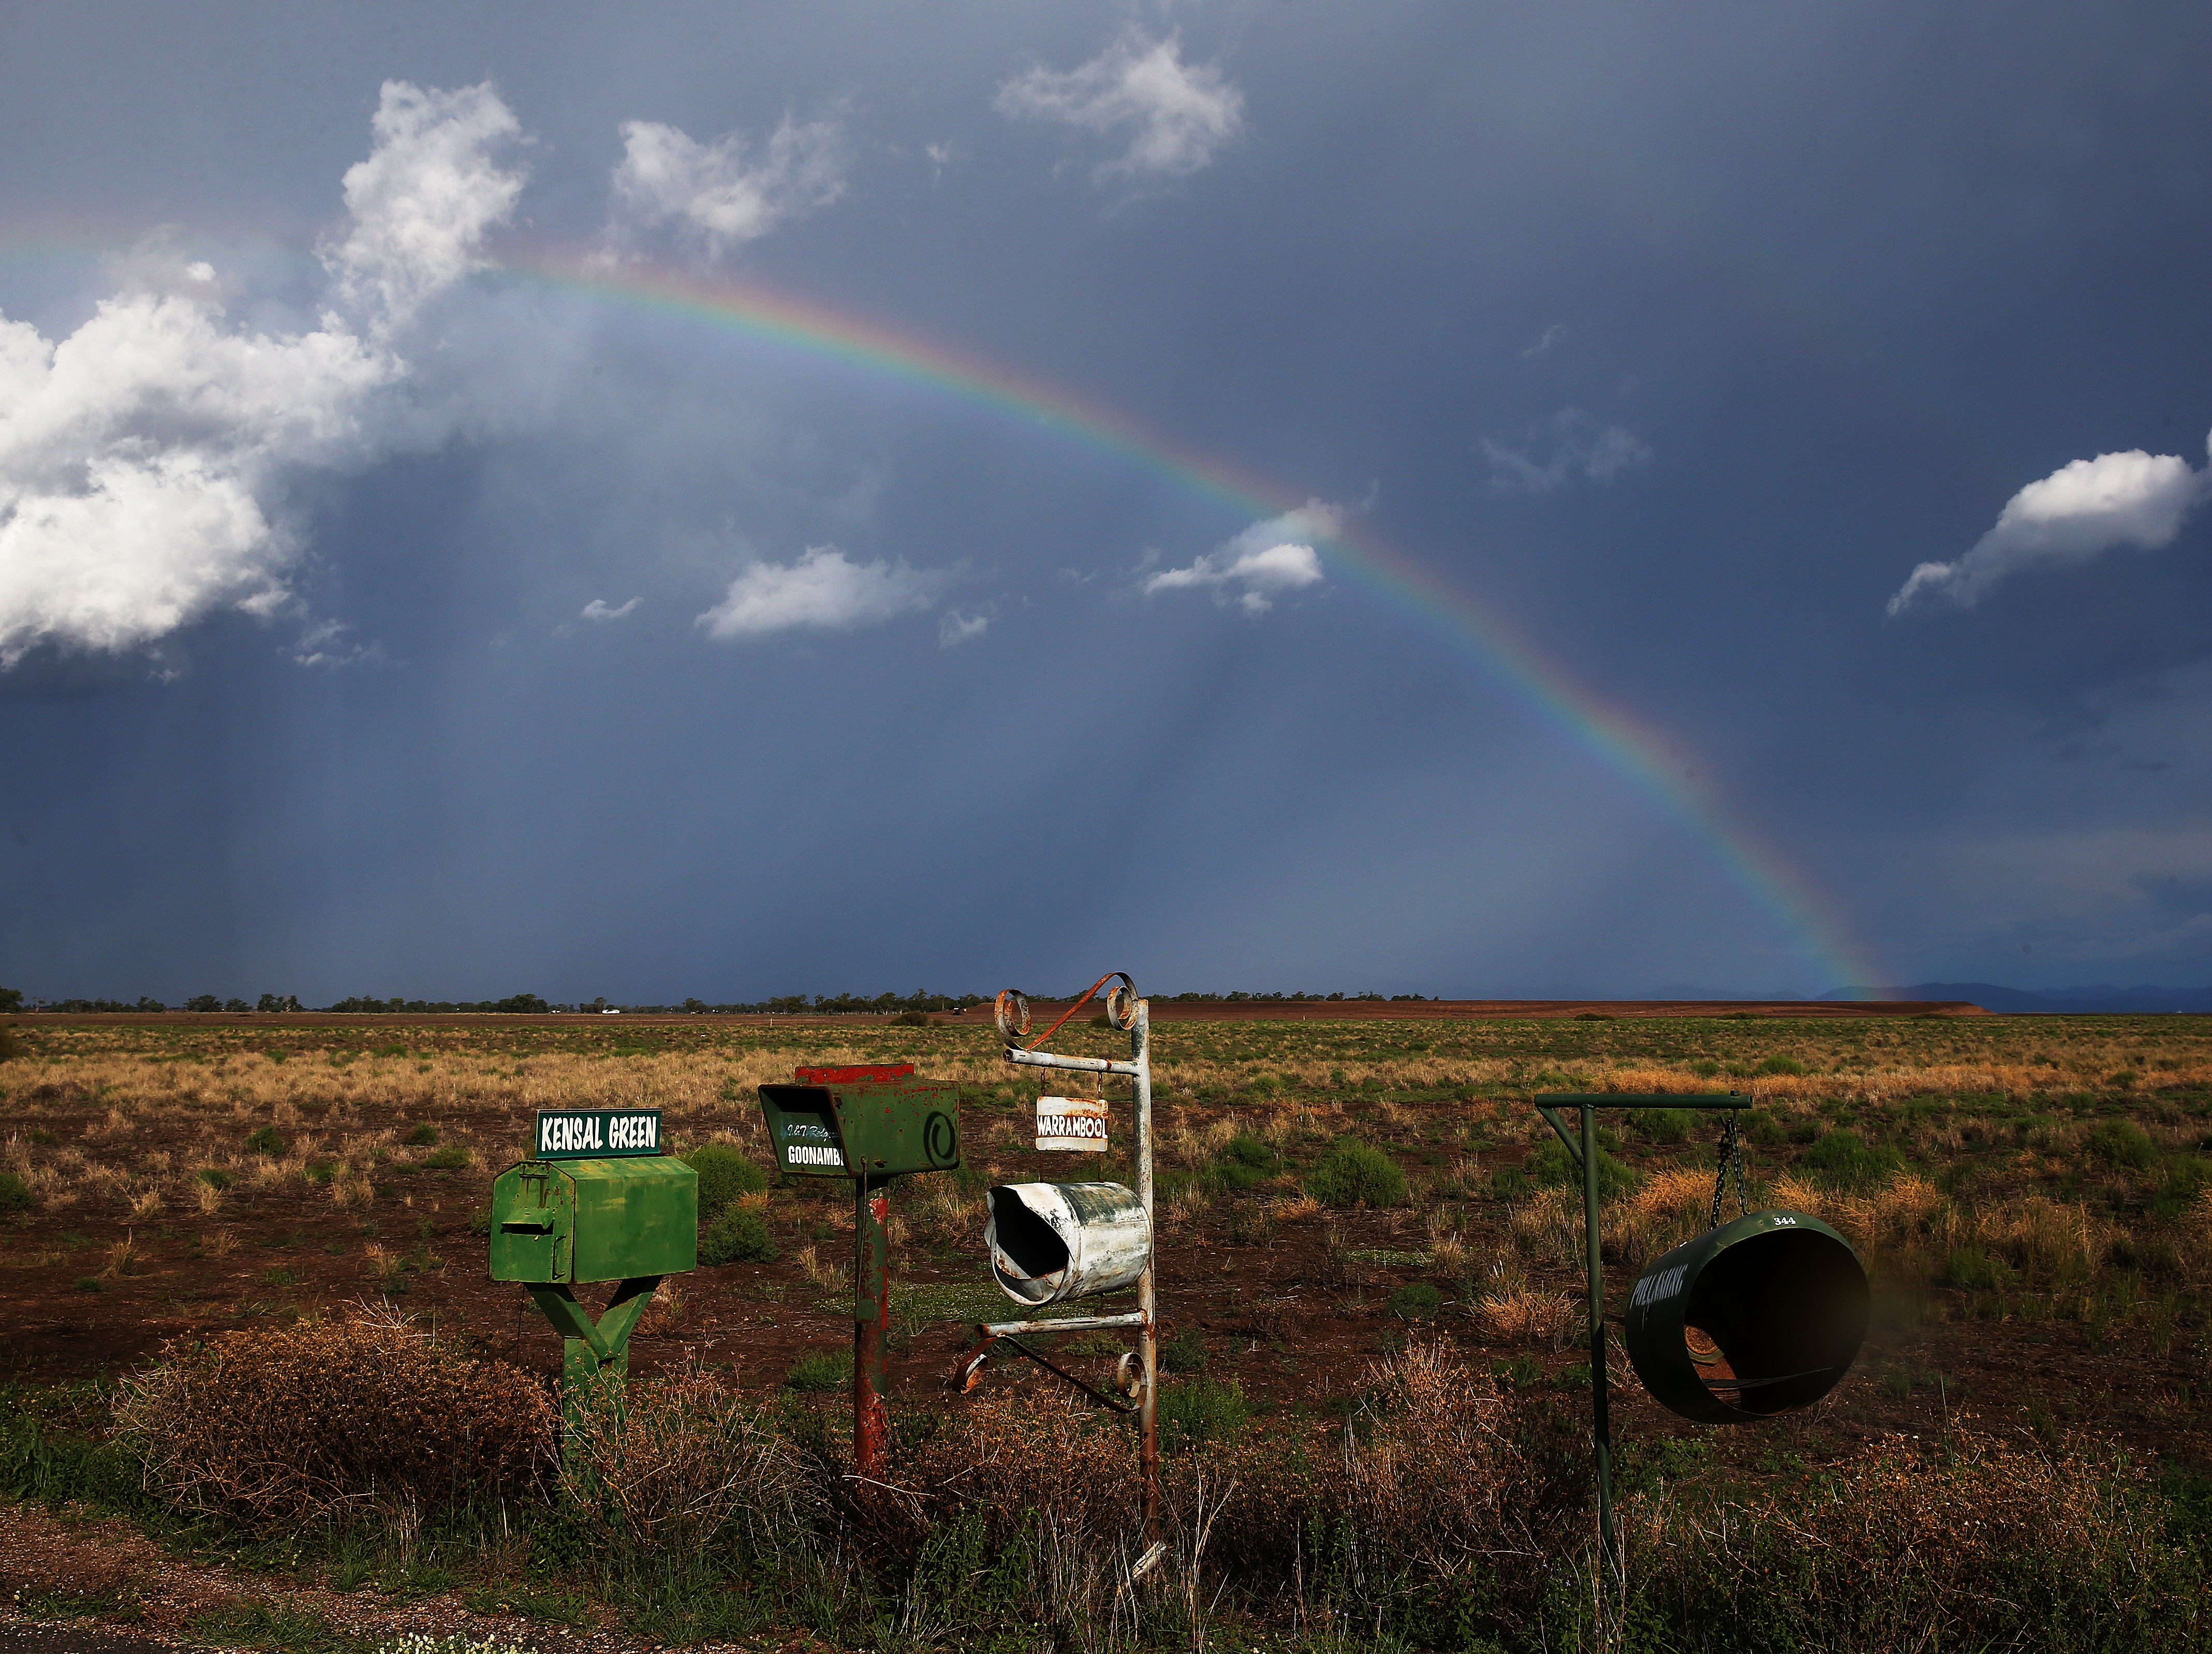 A rainbow appears behind a storm front on the Breeza Plains in north west NSW. Residents in parts of NSW continue to face floodwater risks after a weekend of torrential downfalls. (AAP Image/ Peter Lorimer) NO ARCHIVING